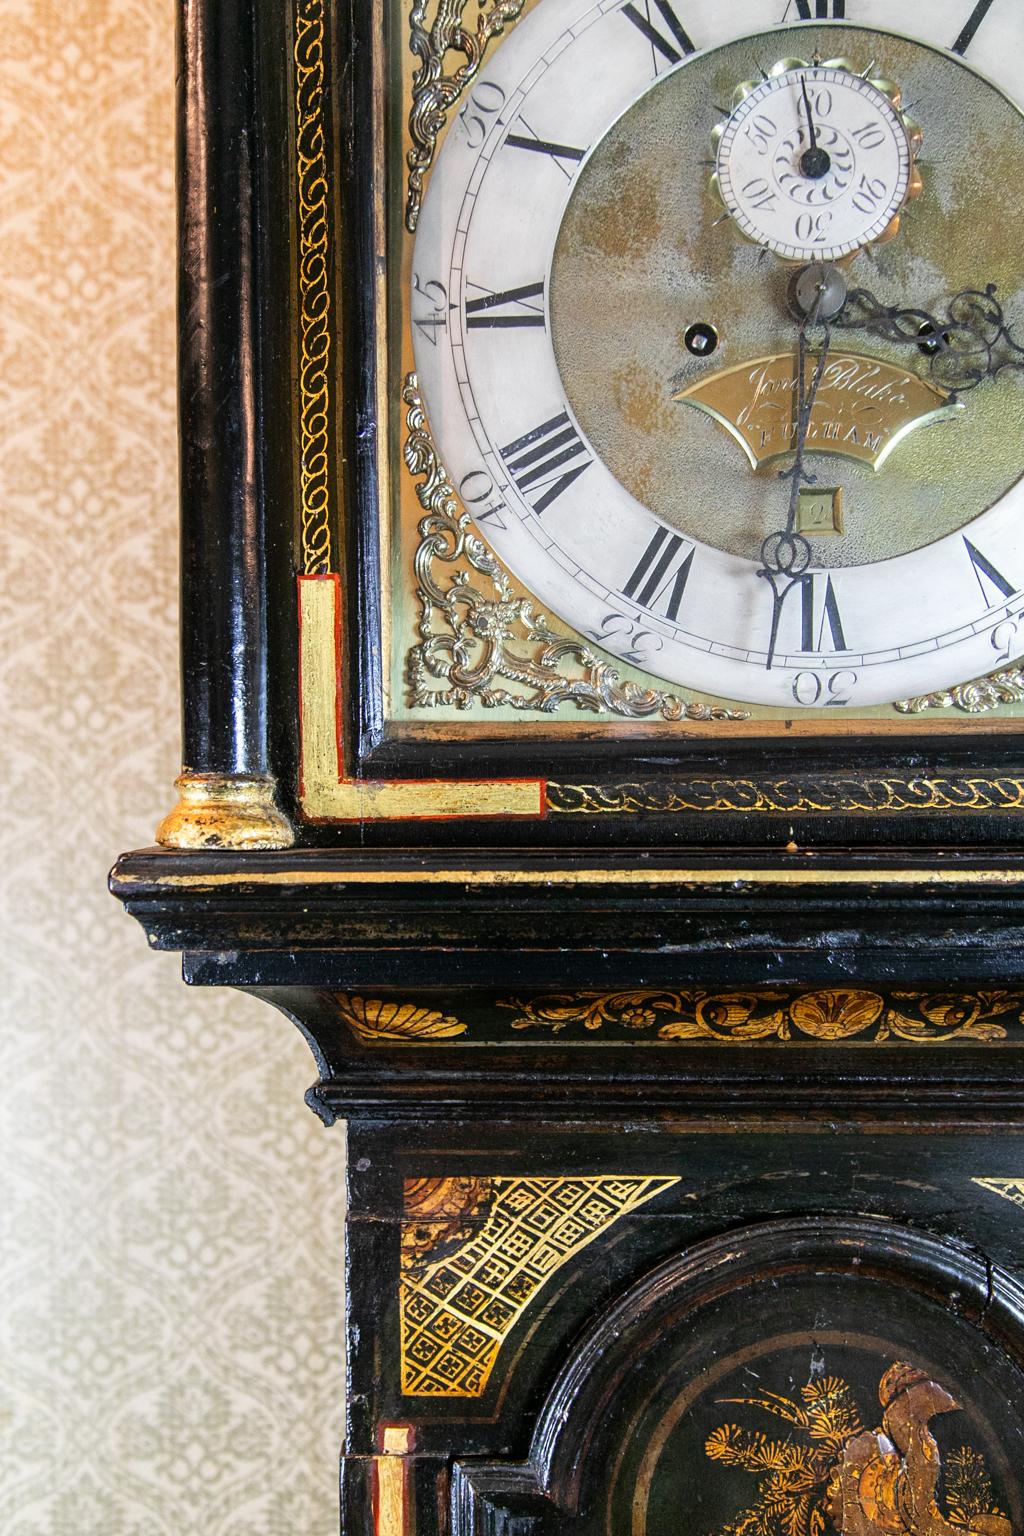 18th century English chinoiserie grandfather clock, by Jonathan Blake of Fulham, England. It has a strike and silent mode and is in working order.